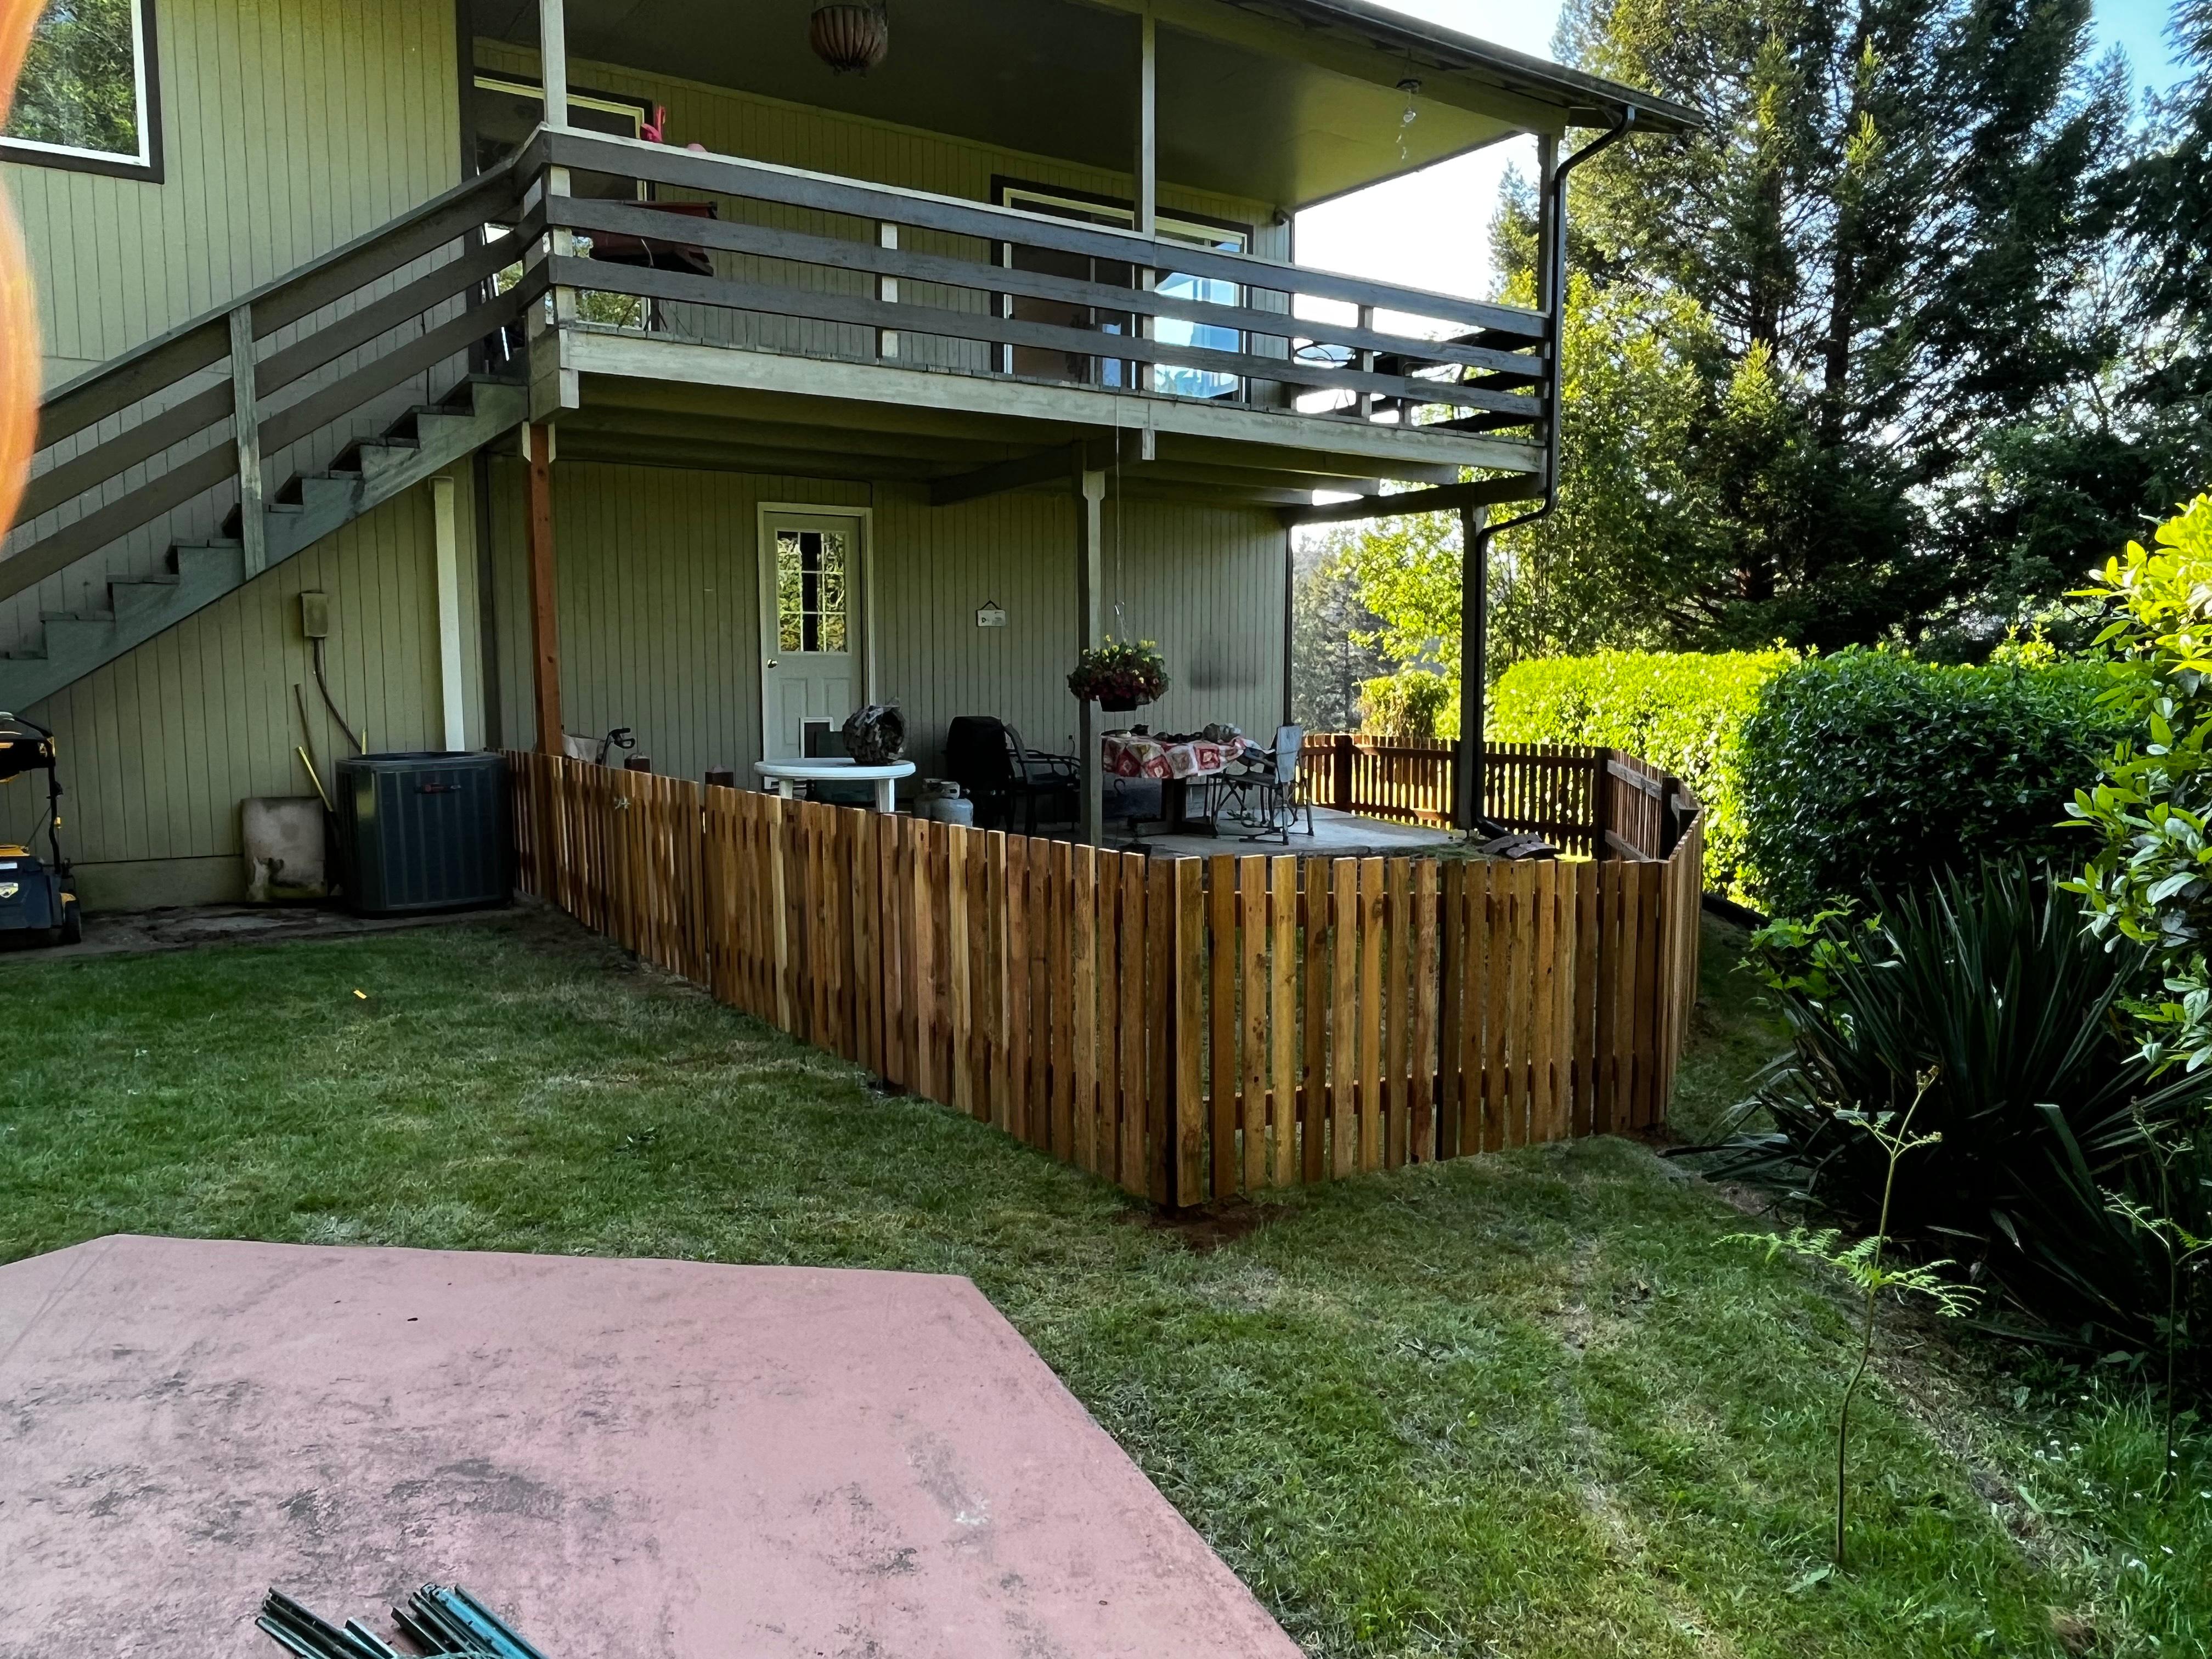 Cleveland Fencing and Contracting, LLC is a trusted fencing company situated in the picturesque coastal town of Coos Bay, OR. We have many years of experience in the industry. We are available Monday through Friday for your convenience. Contact us today to learn more and schedule your appointment!